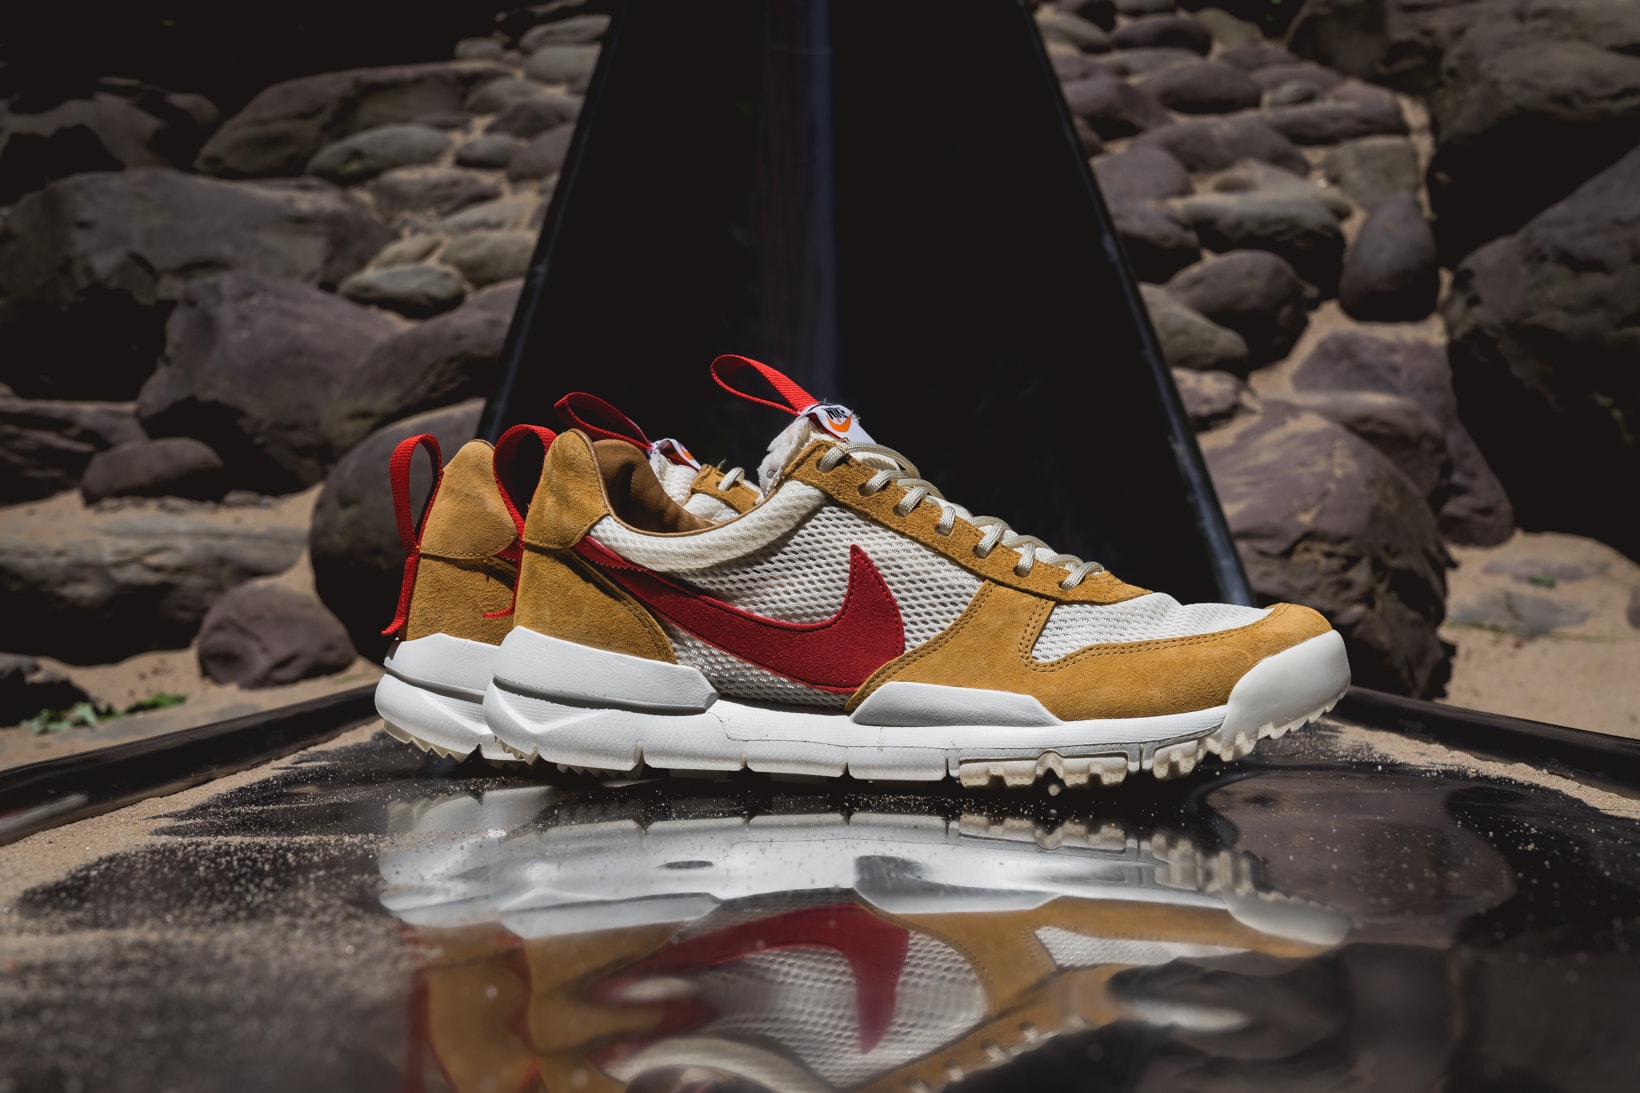 Tom Sachs x NikeCraft General Purpose Shoe Brown Another Look